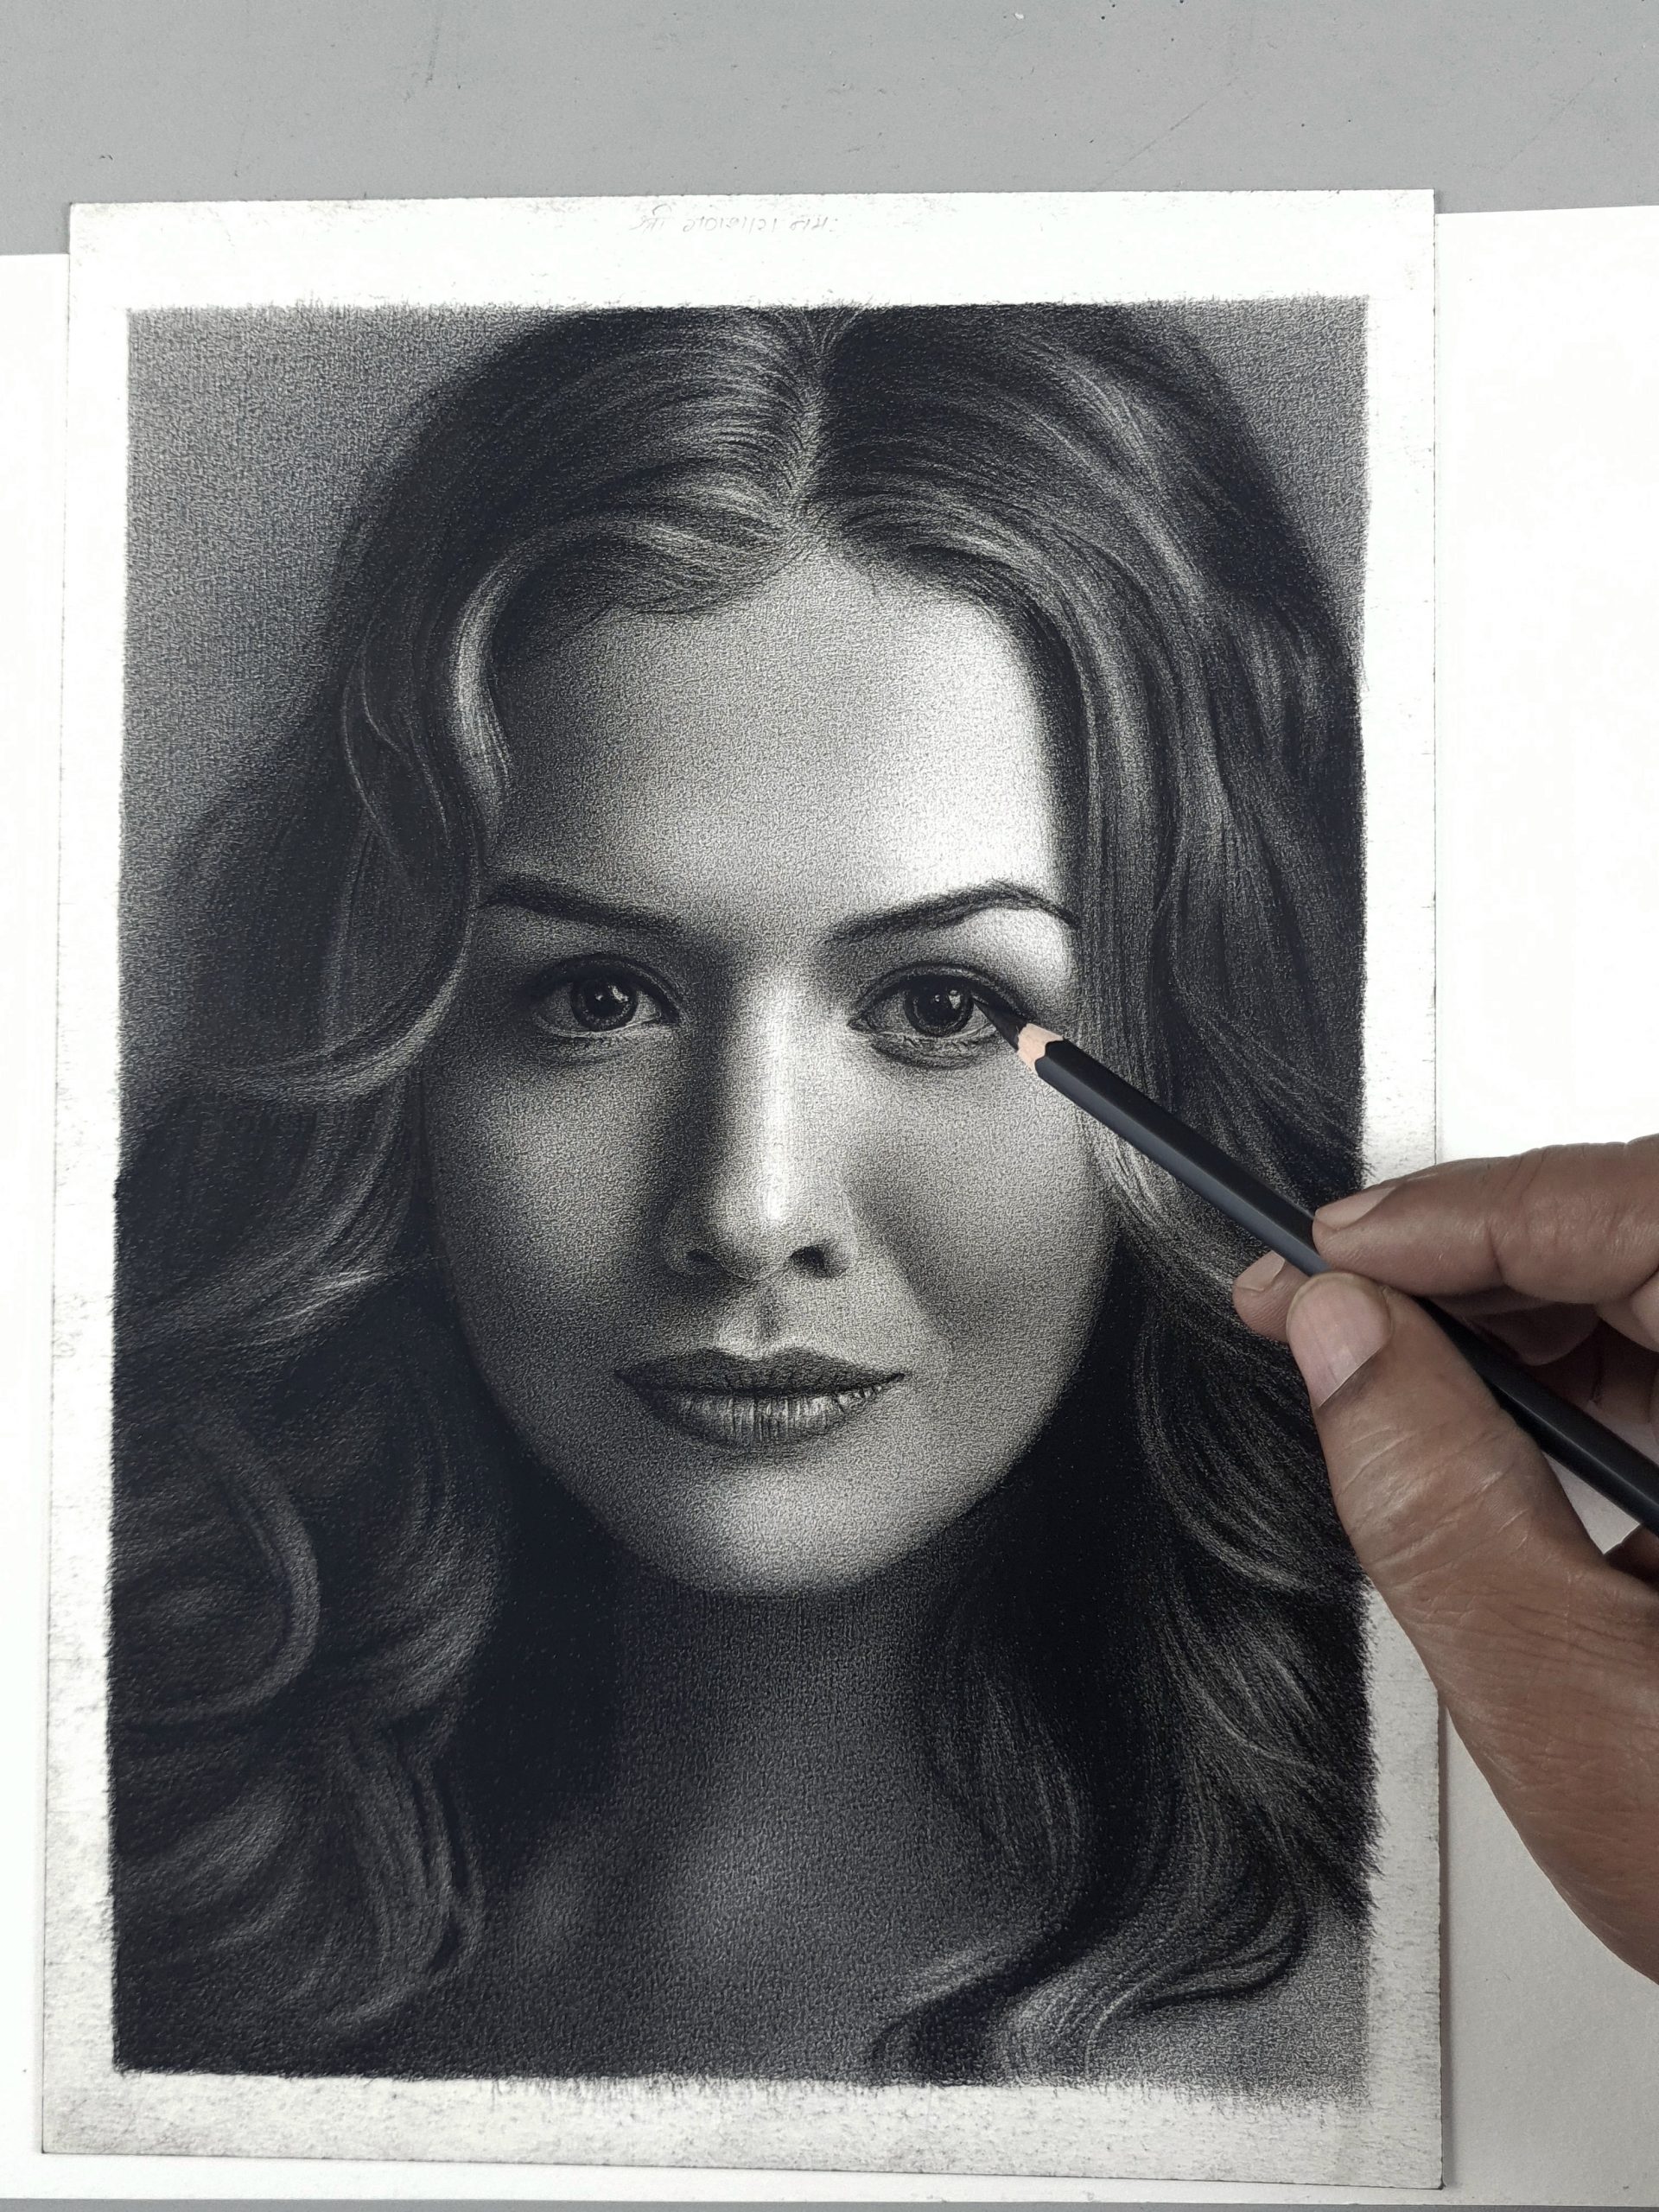 How To Draw A Realistic Face With Pencil